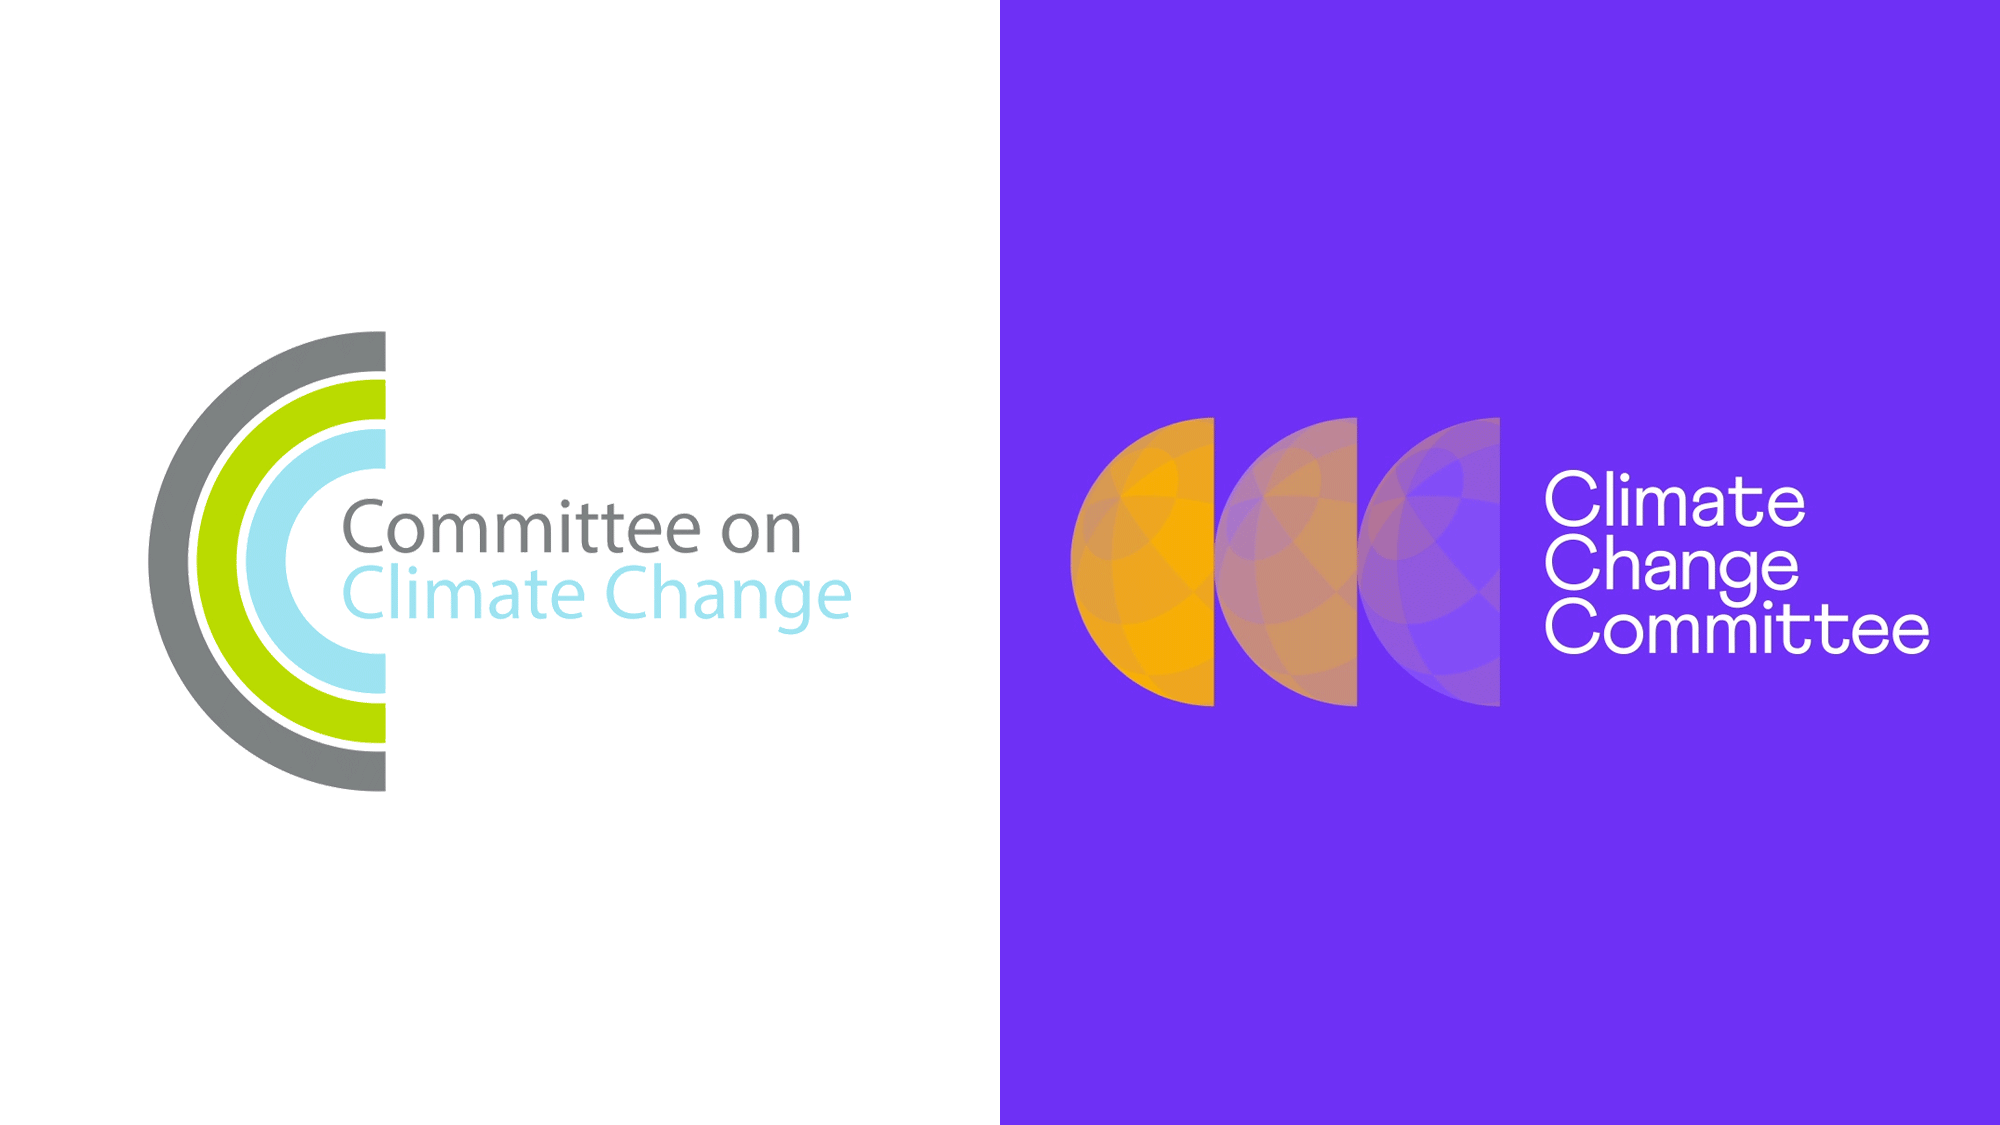 Brand New: New Logo and Identity for Climate Change Committee by Templo